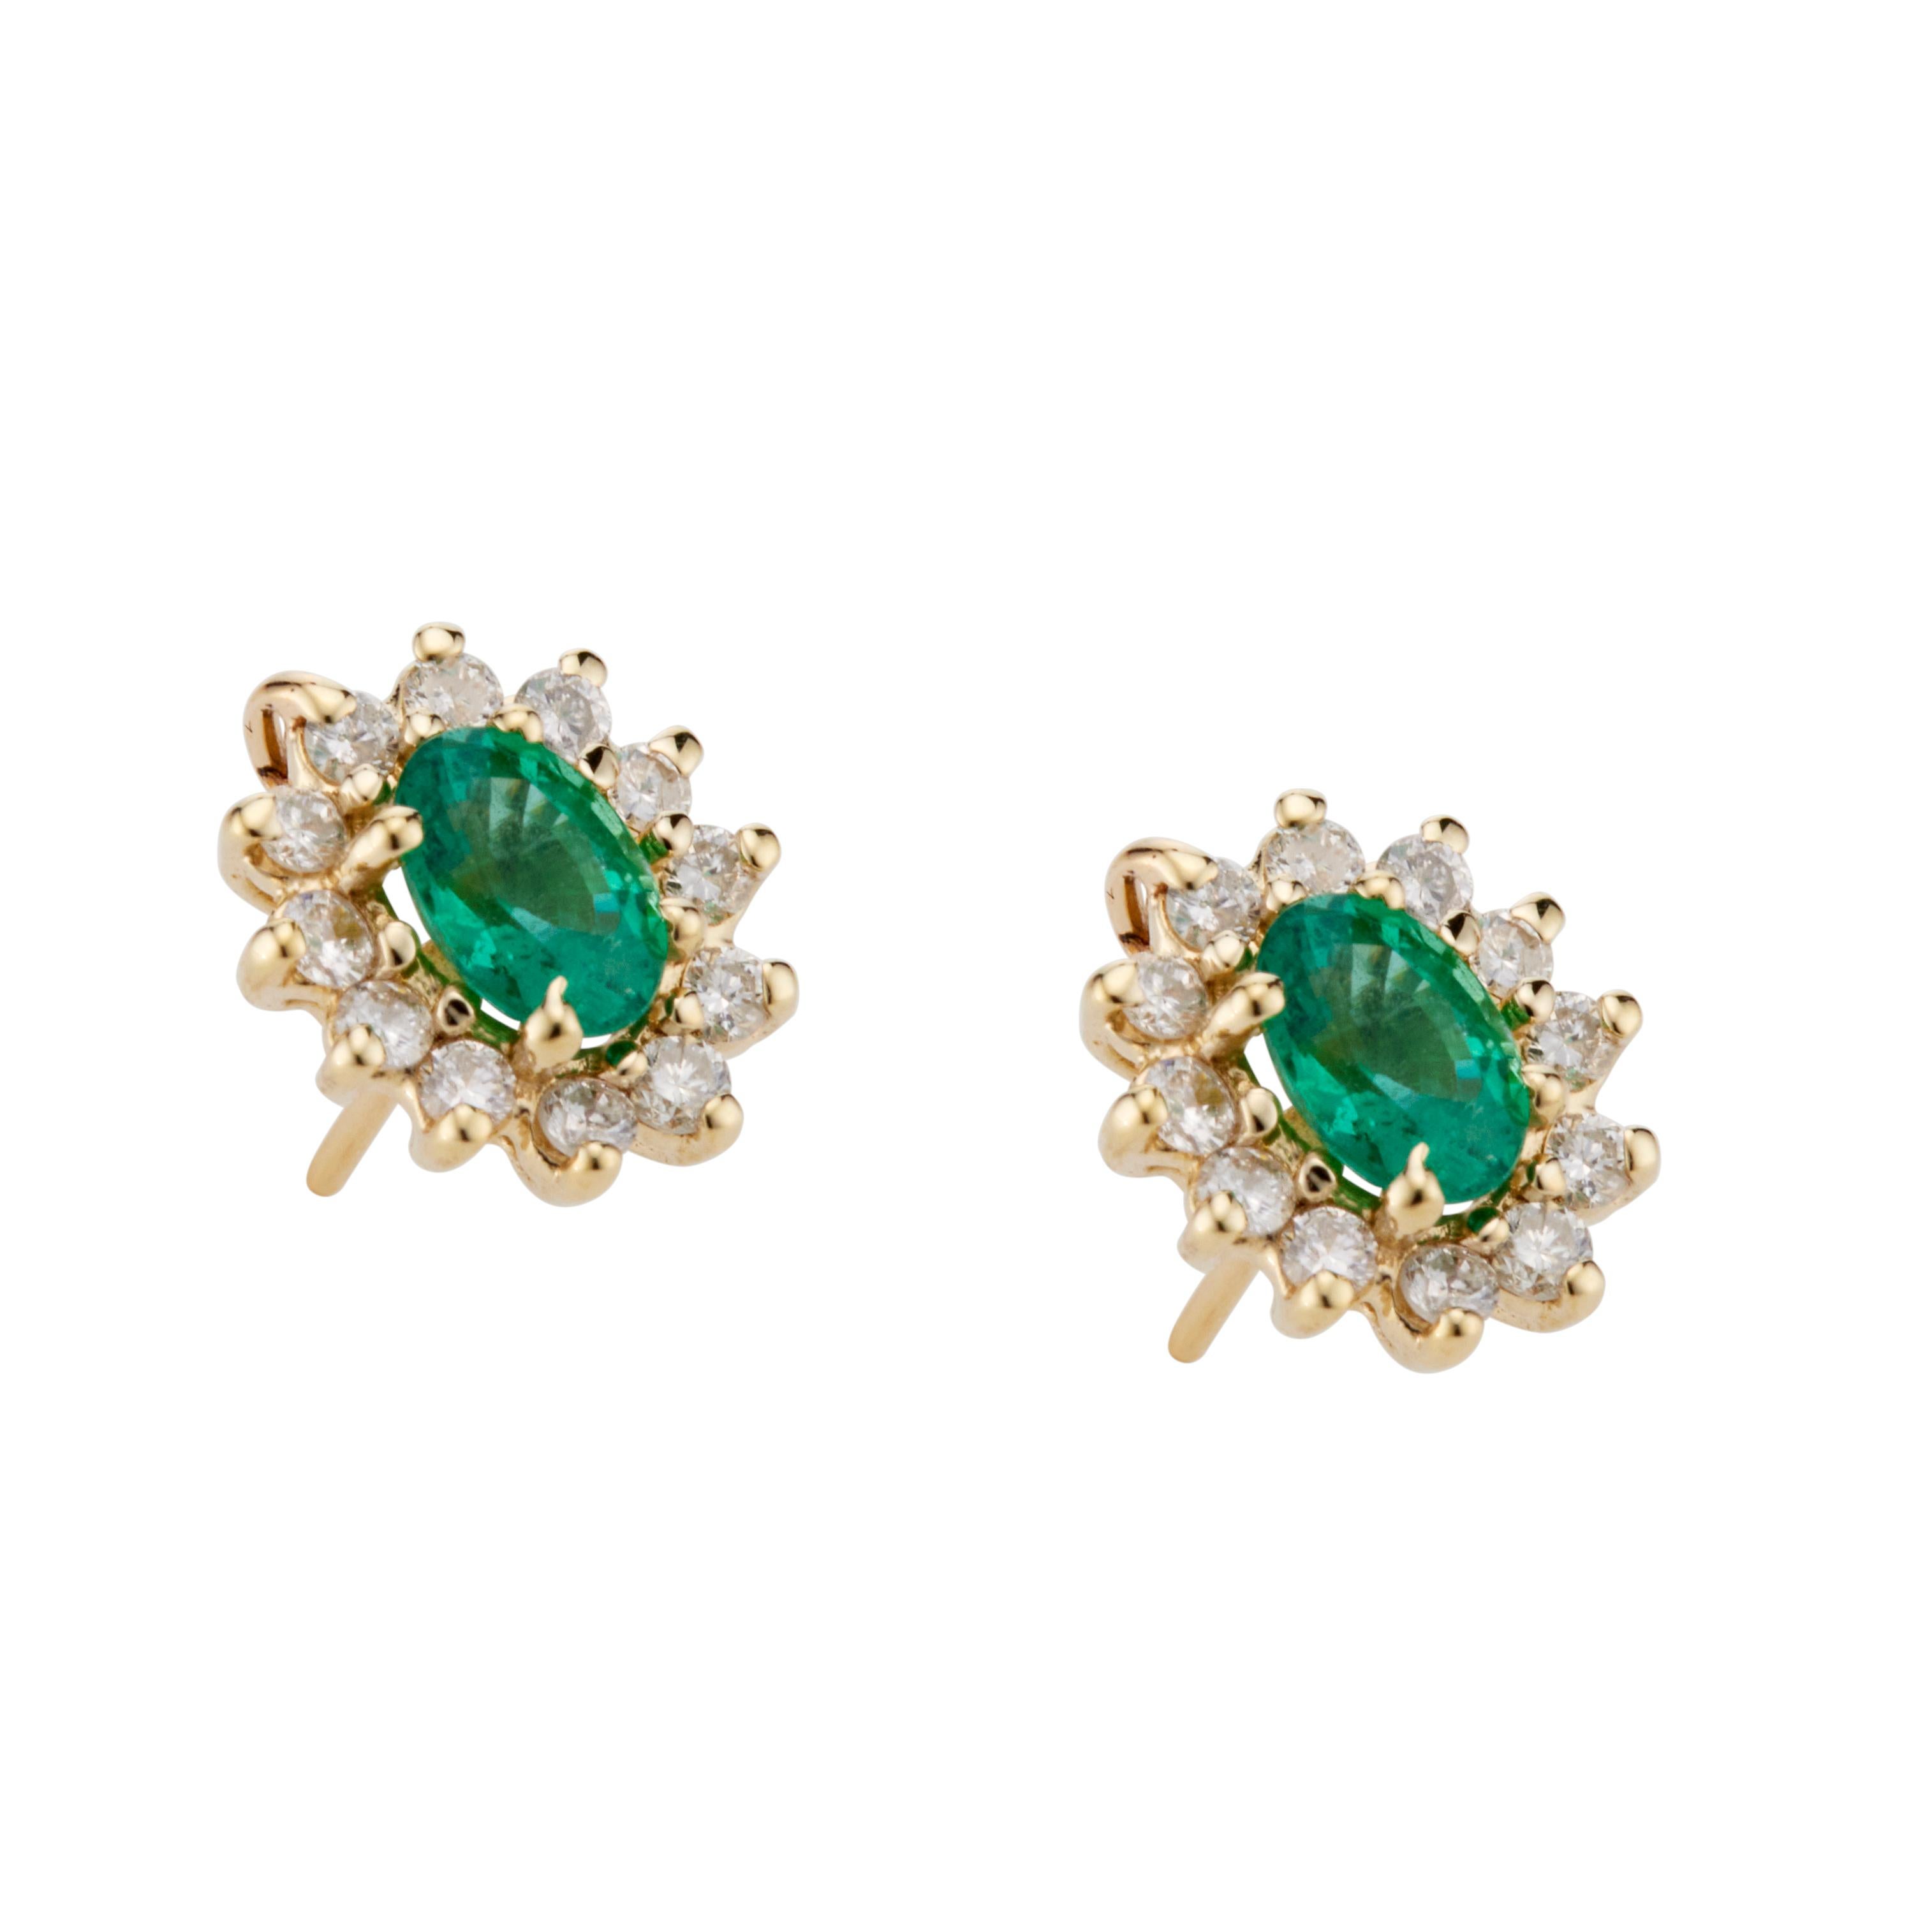 Bright green oval emerald earrings with a halo of full cut diamonds around each emeralds,  in 14k yellow gold baskets. 

2 oval green emeralds, MI approx. .90cts
24 round brilliant cut diamonds, I SI-I approx. .33cts
14k yellow gold 
Stamped: